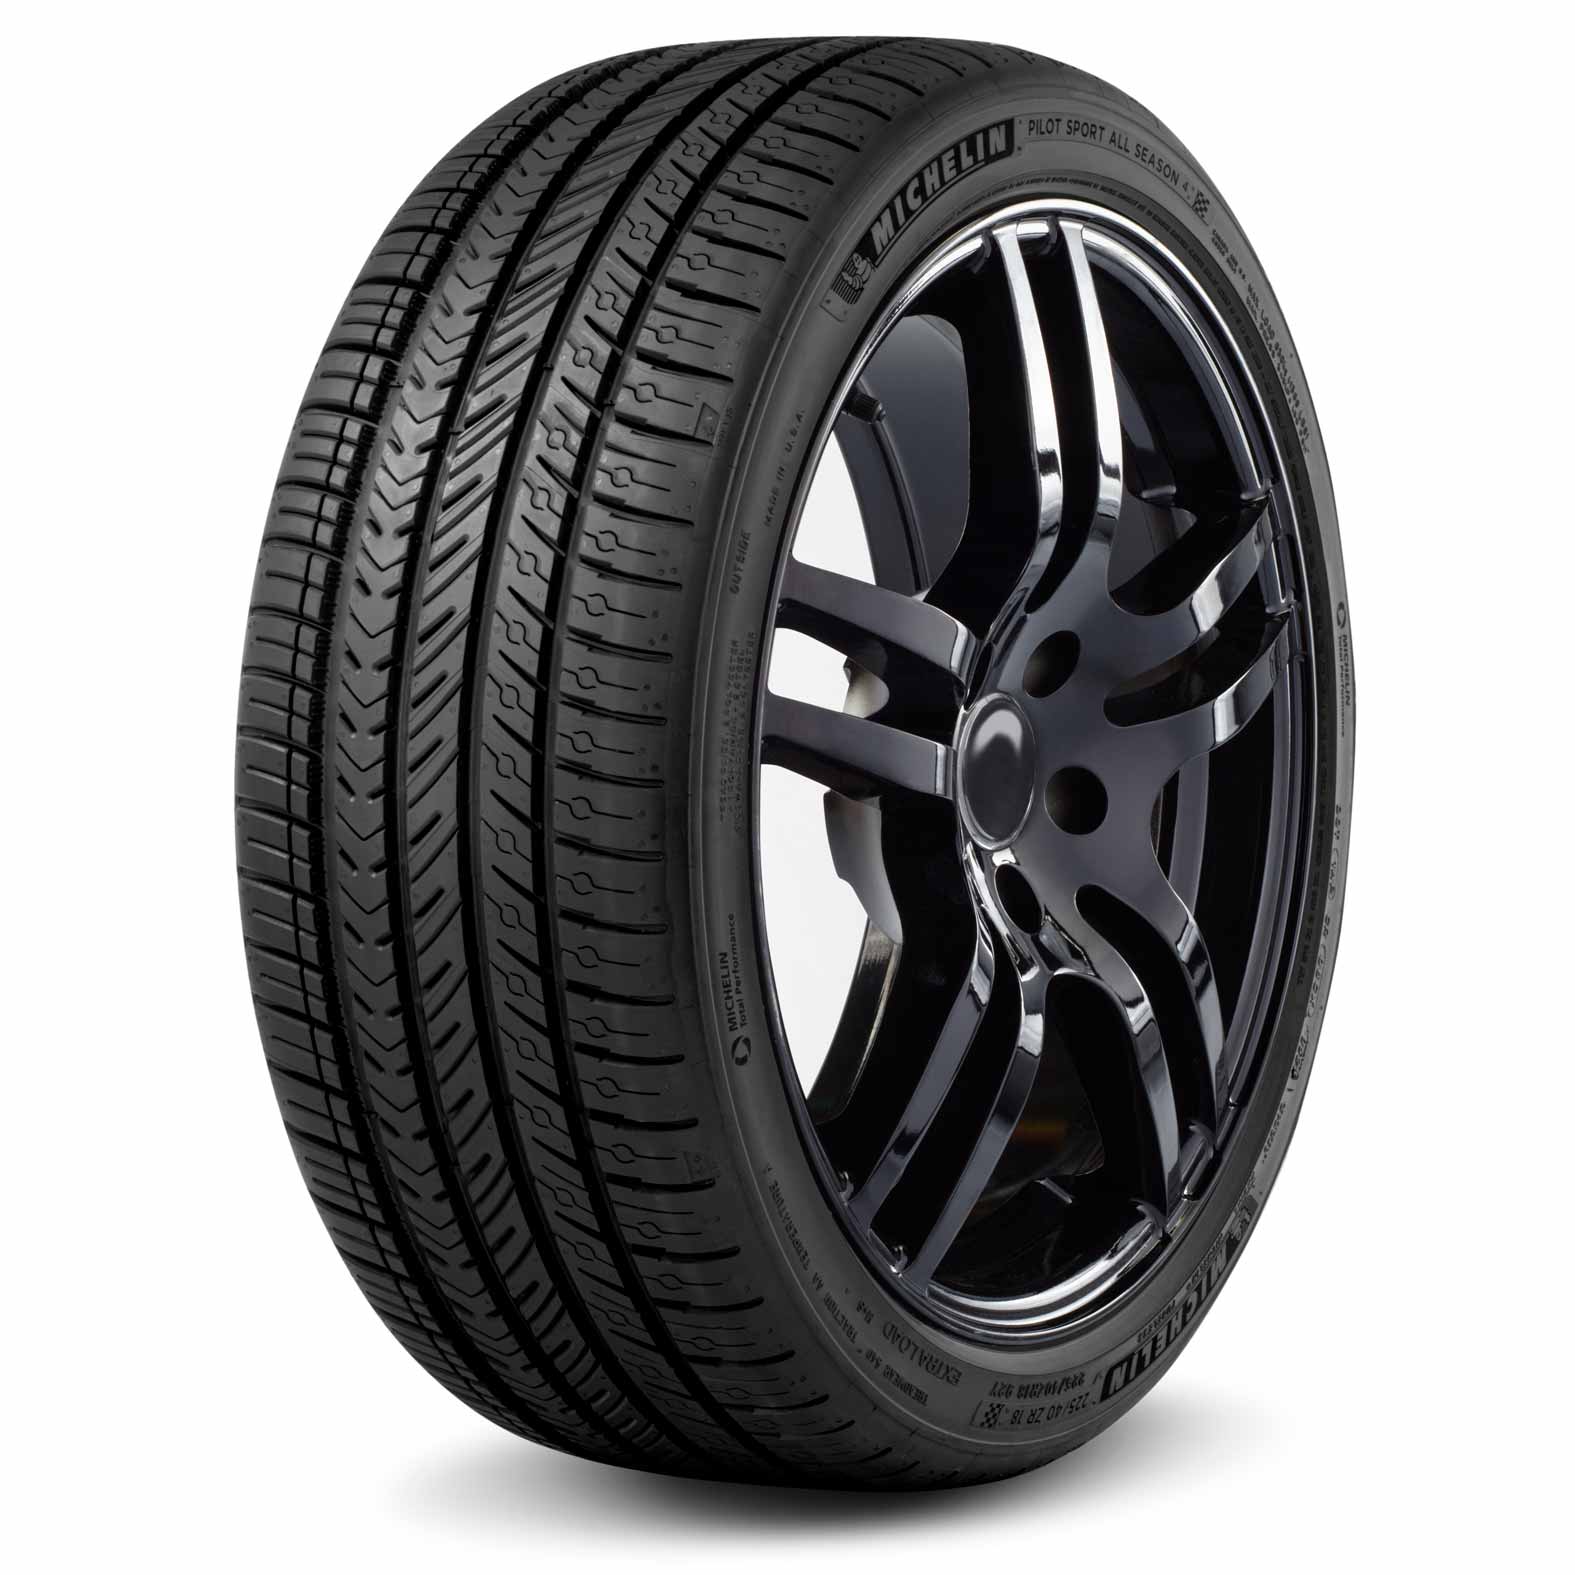 Michelin Pilot Sport AS 4 for Performance